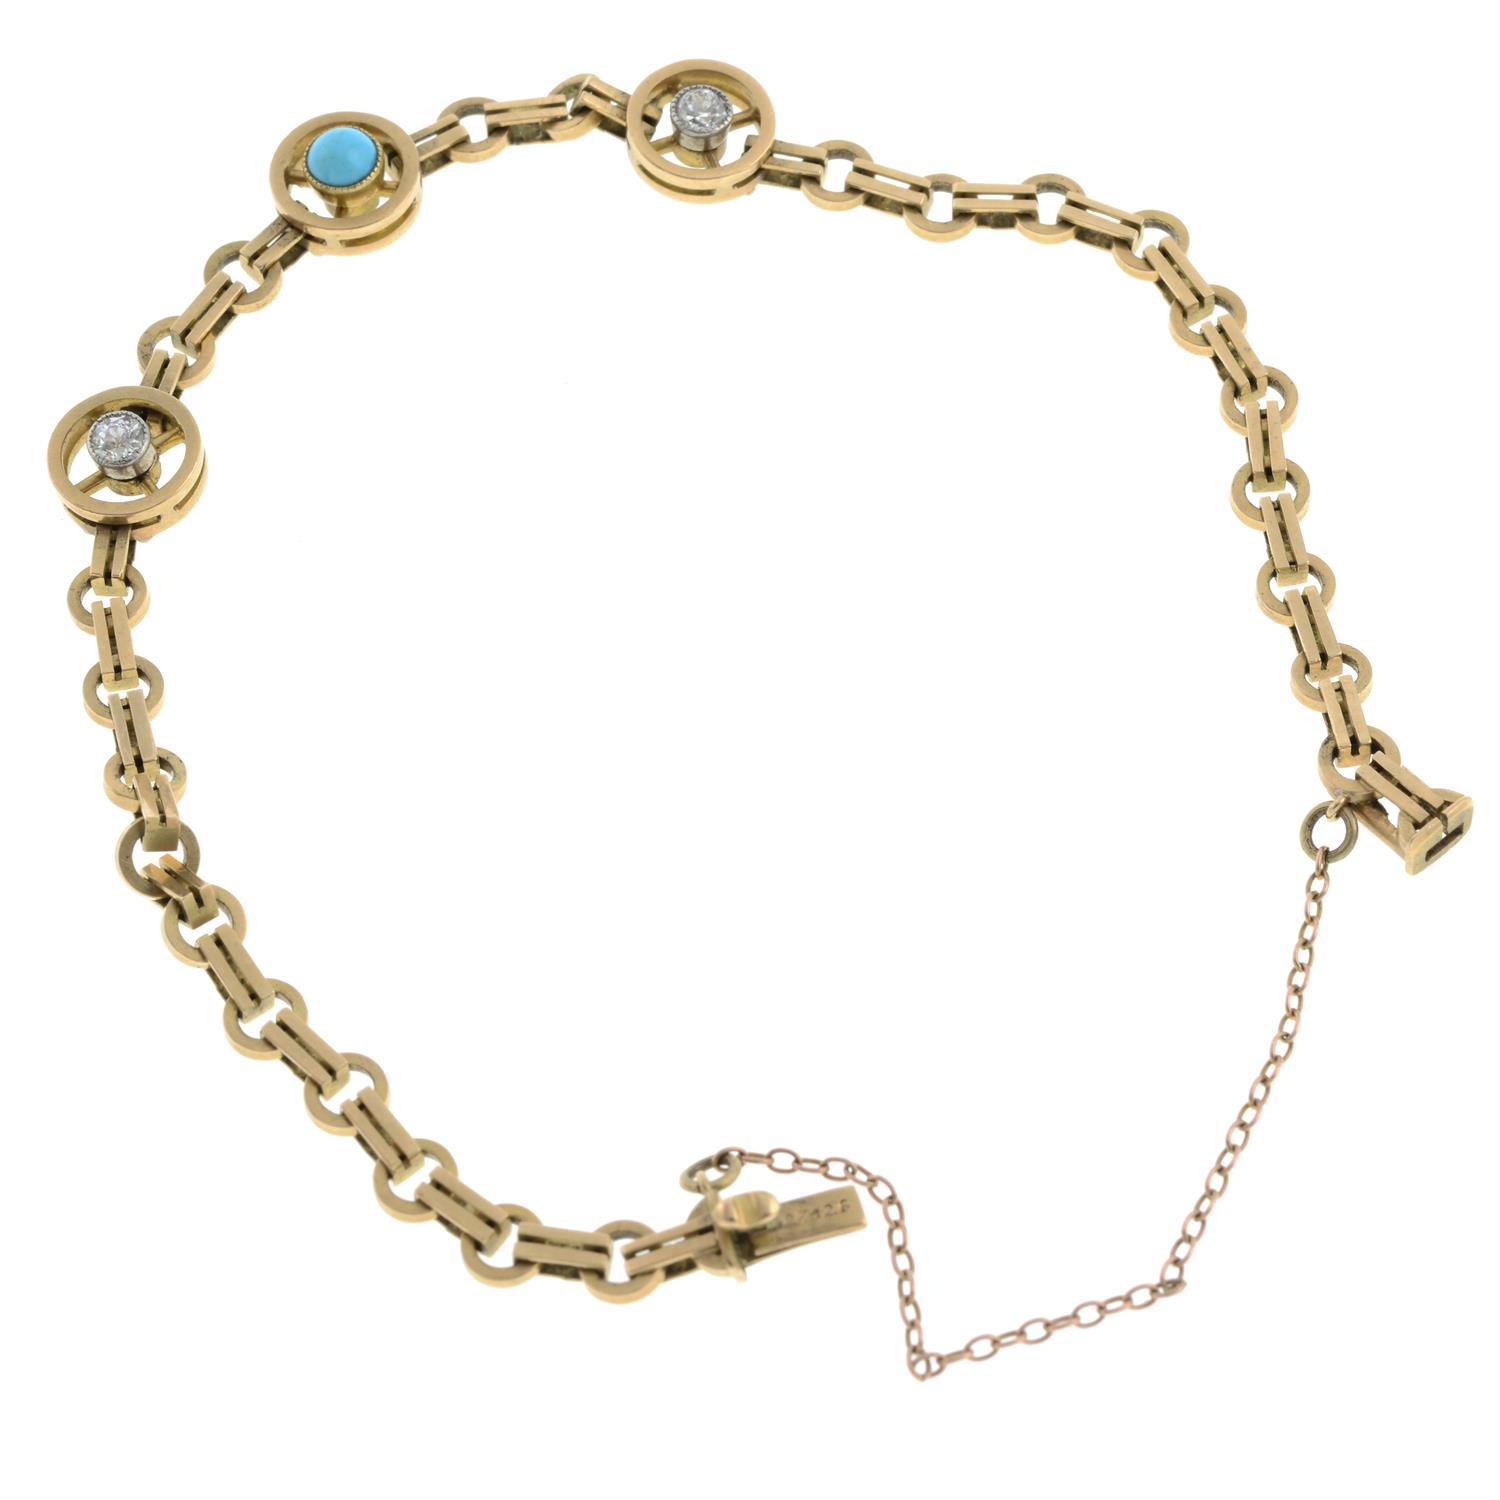 An early 20th century 15ct gold turquoise and diamond bracelet. - Image 2 of 4